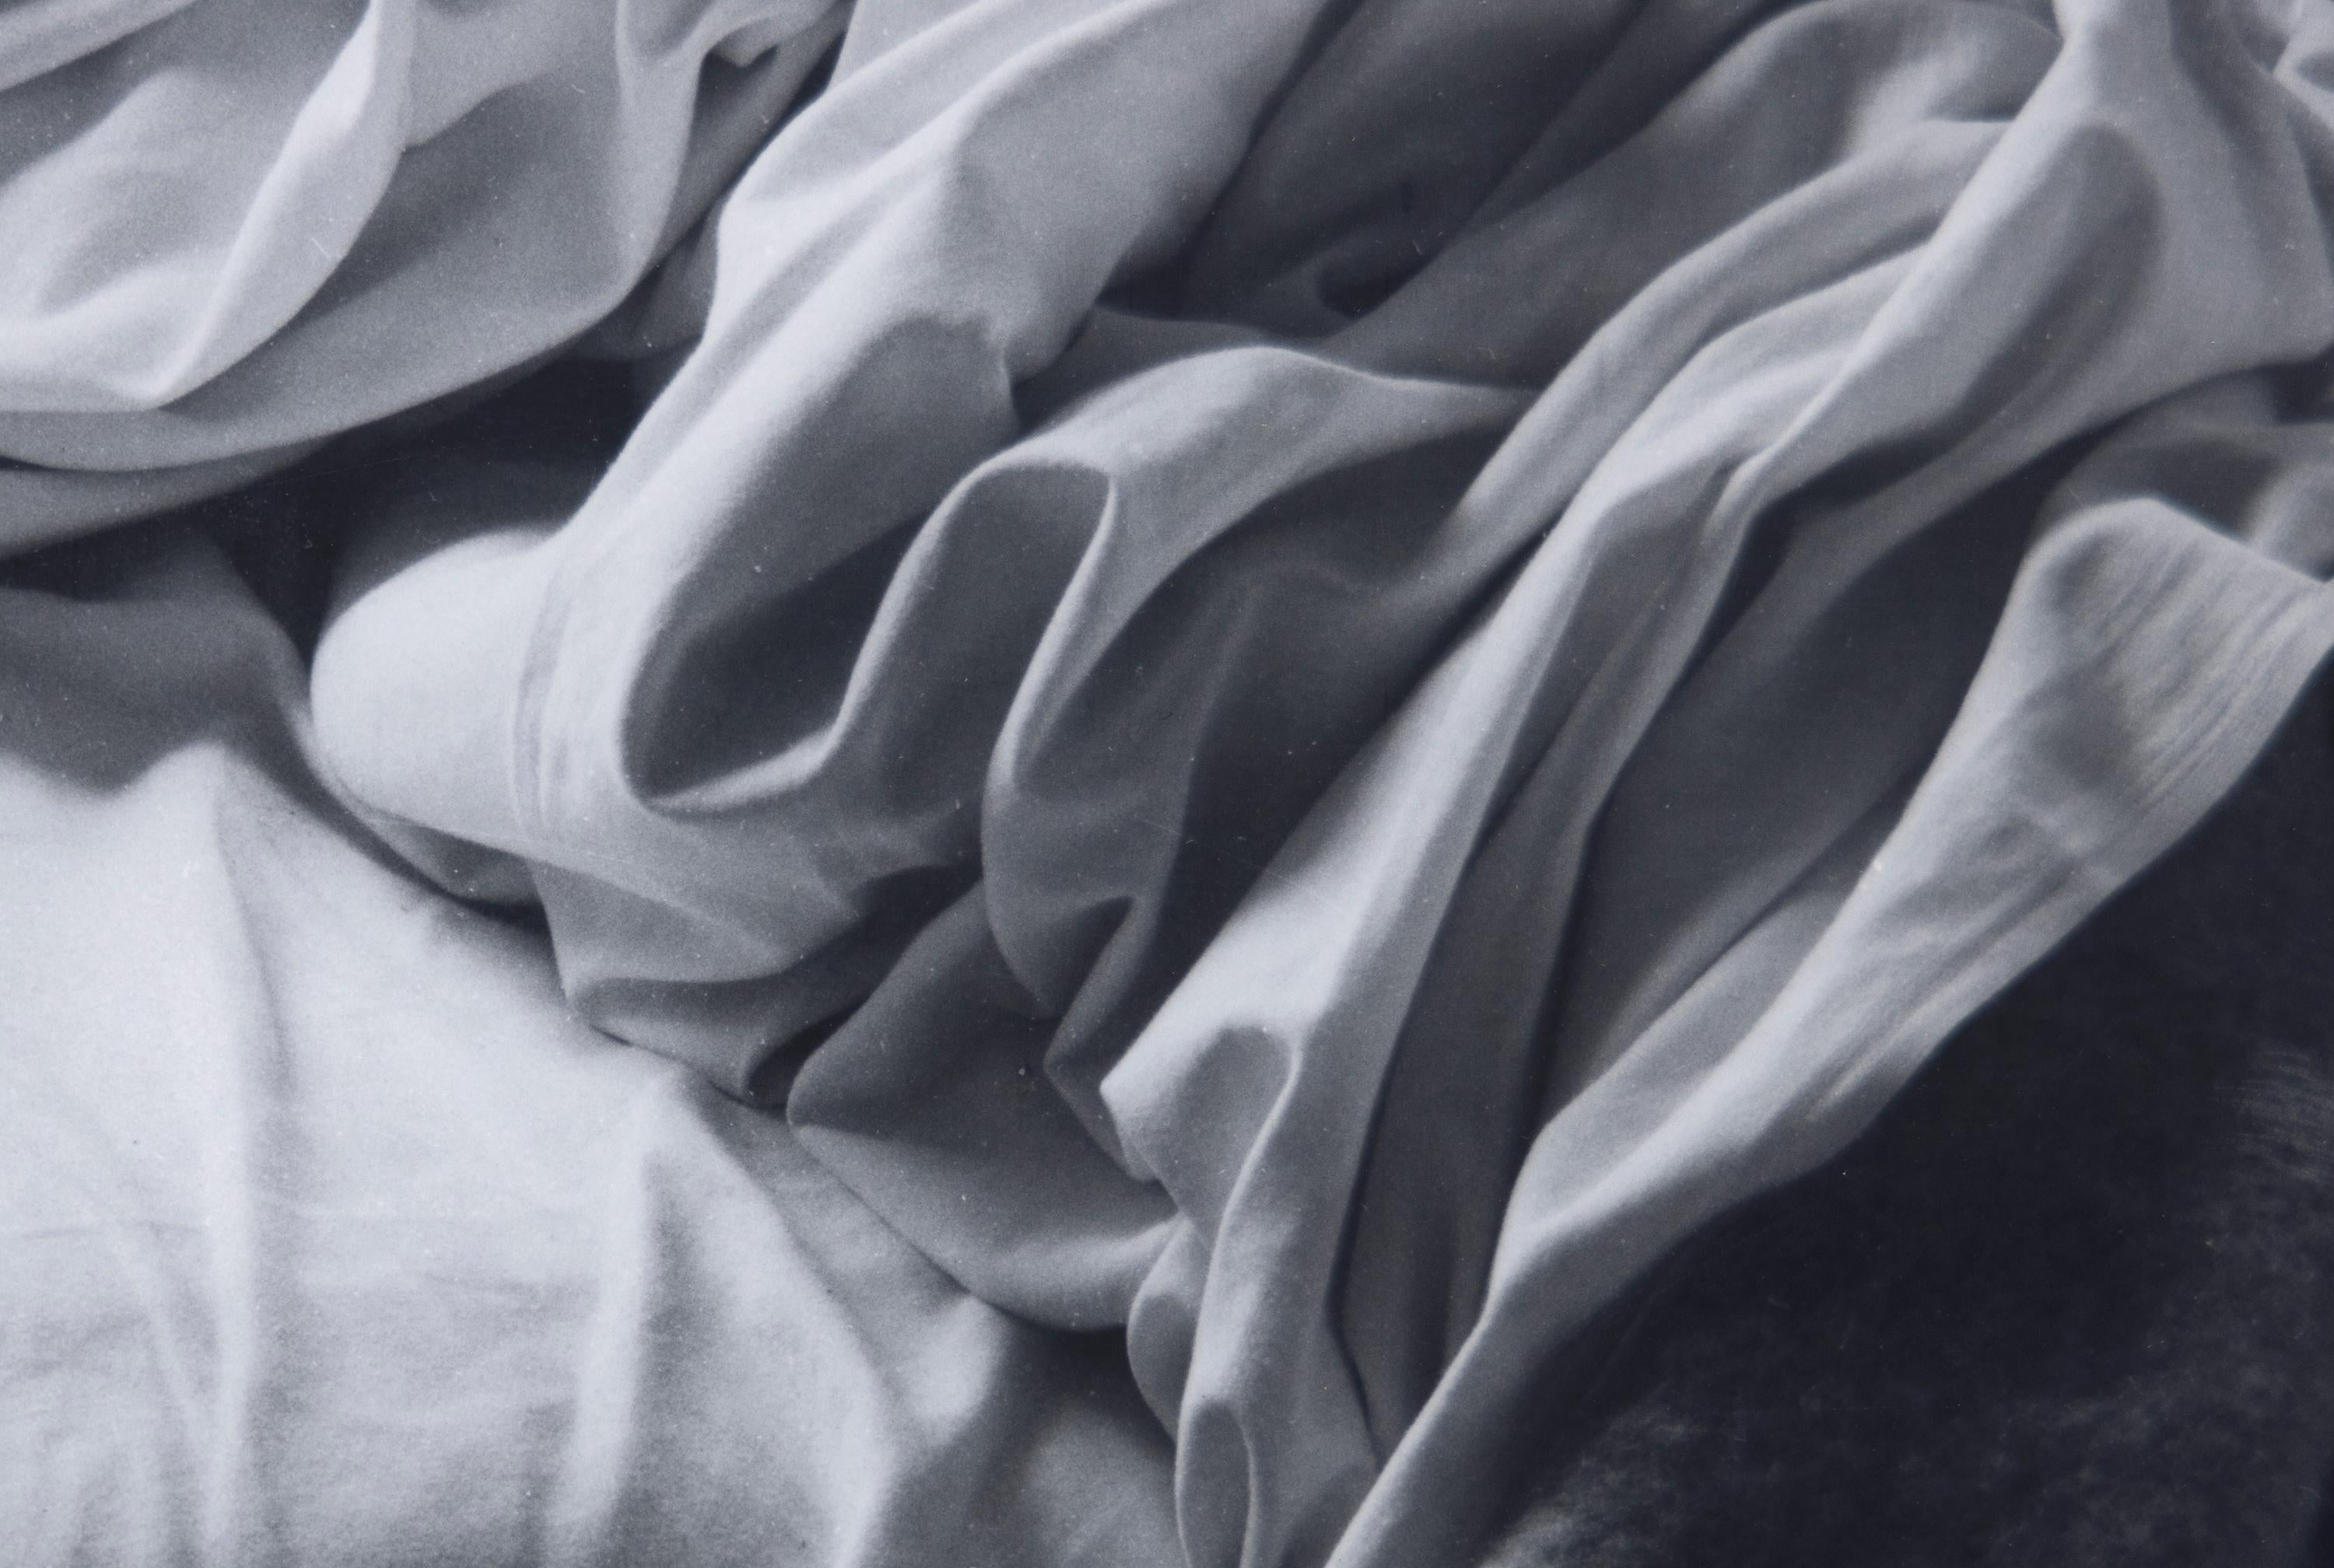 The Unmade Bed - Modern Photograph by Imogen Cunningham